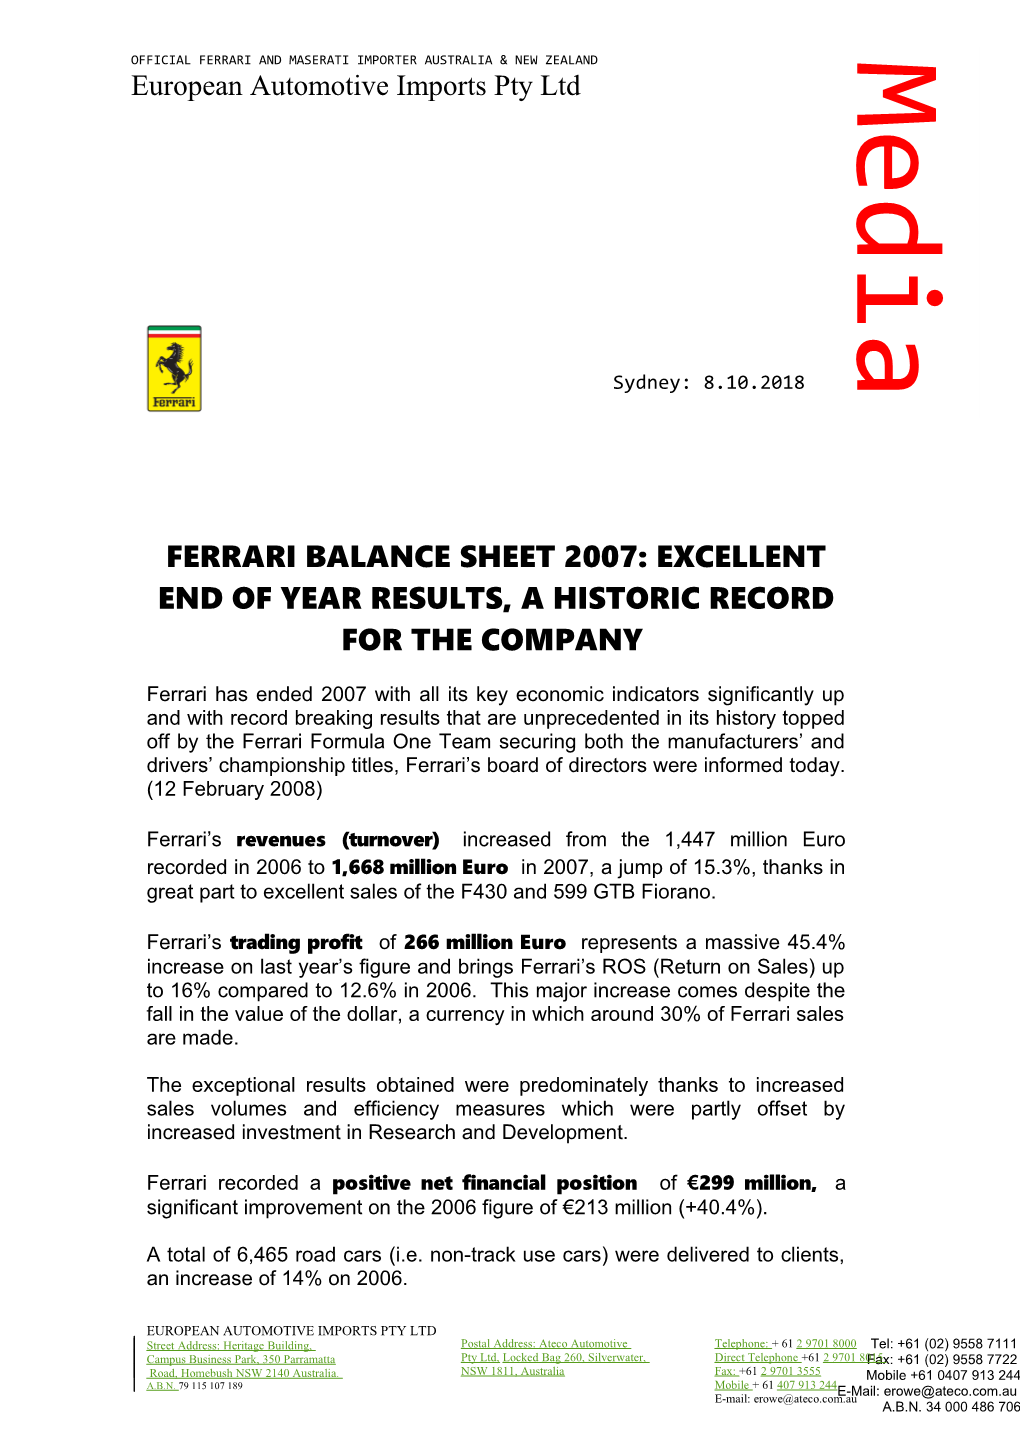 Ferrari Balance Sheet 2007: Excellent End of Year Results, a Historic Record for the Company